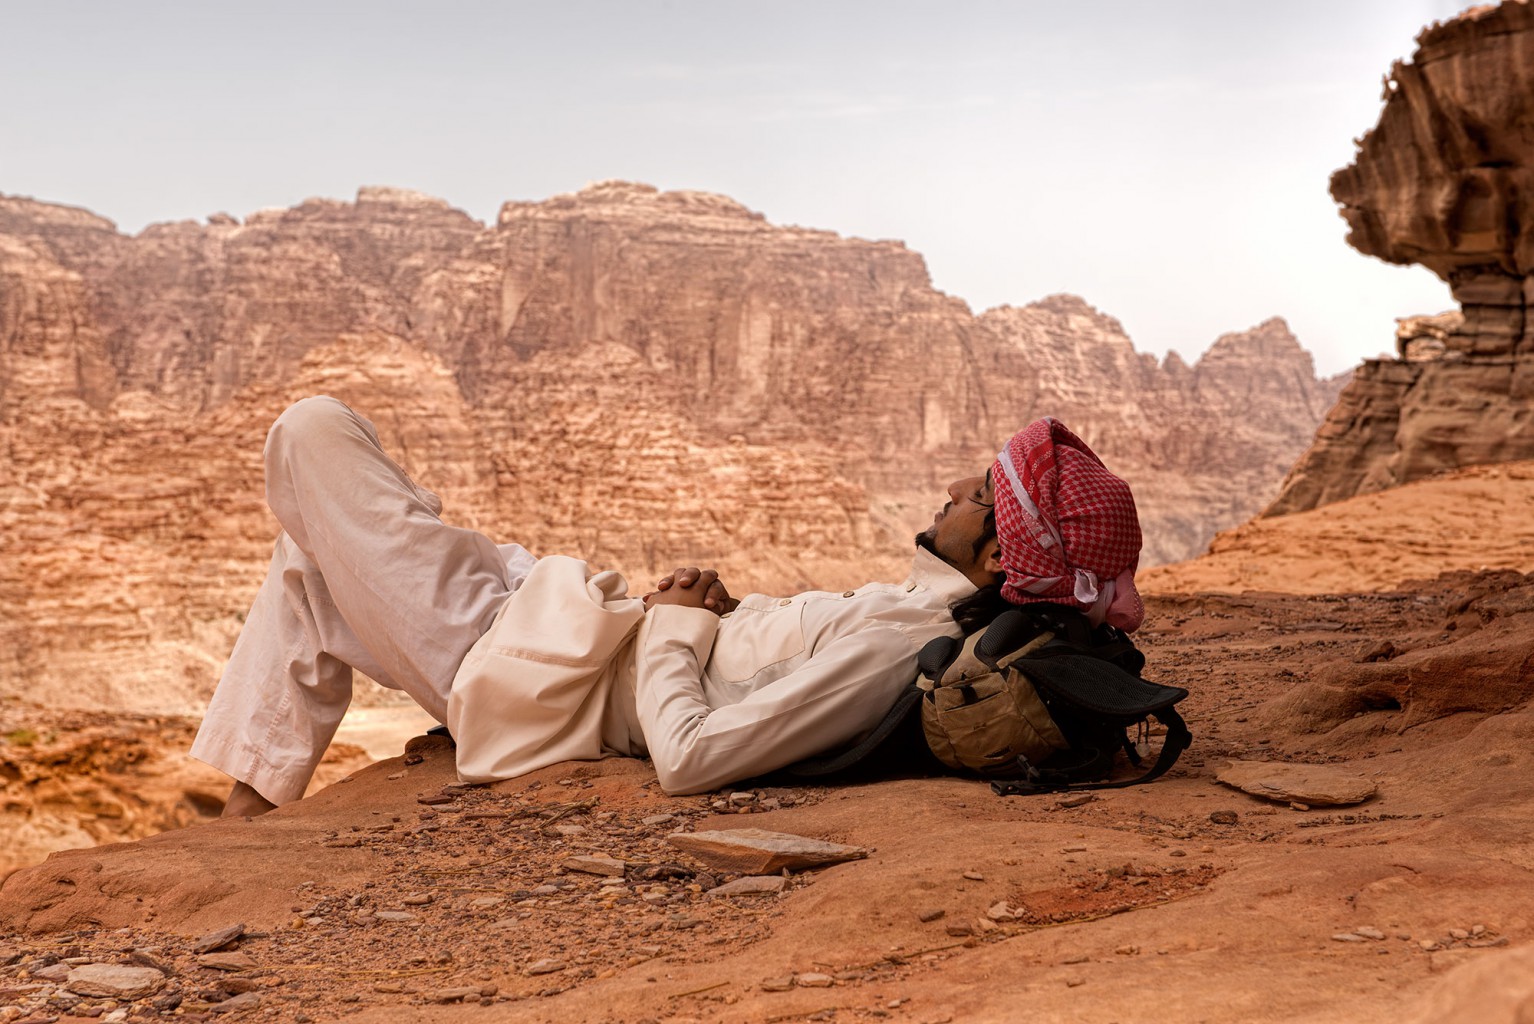 Wadi Rum, a relaxing place in the Kingdom of Jordan